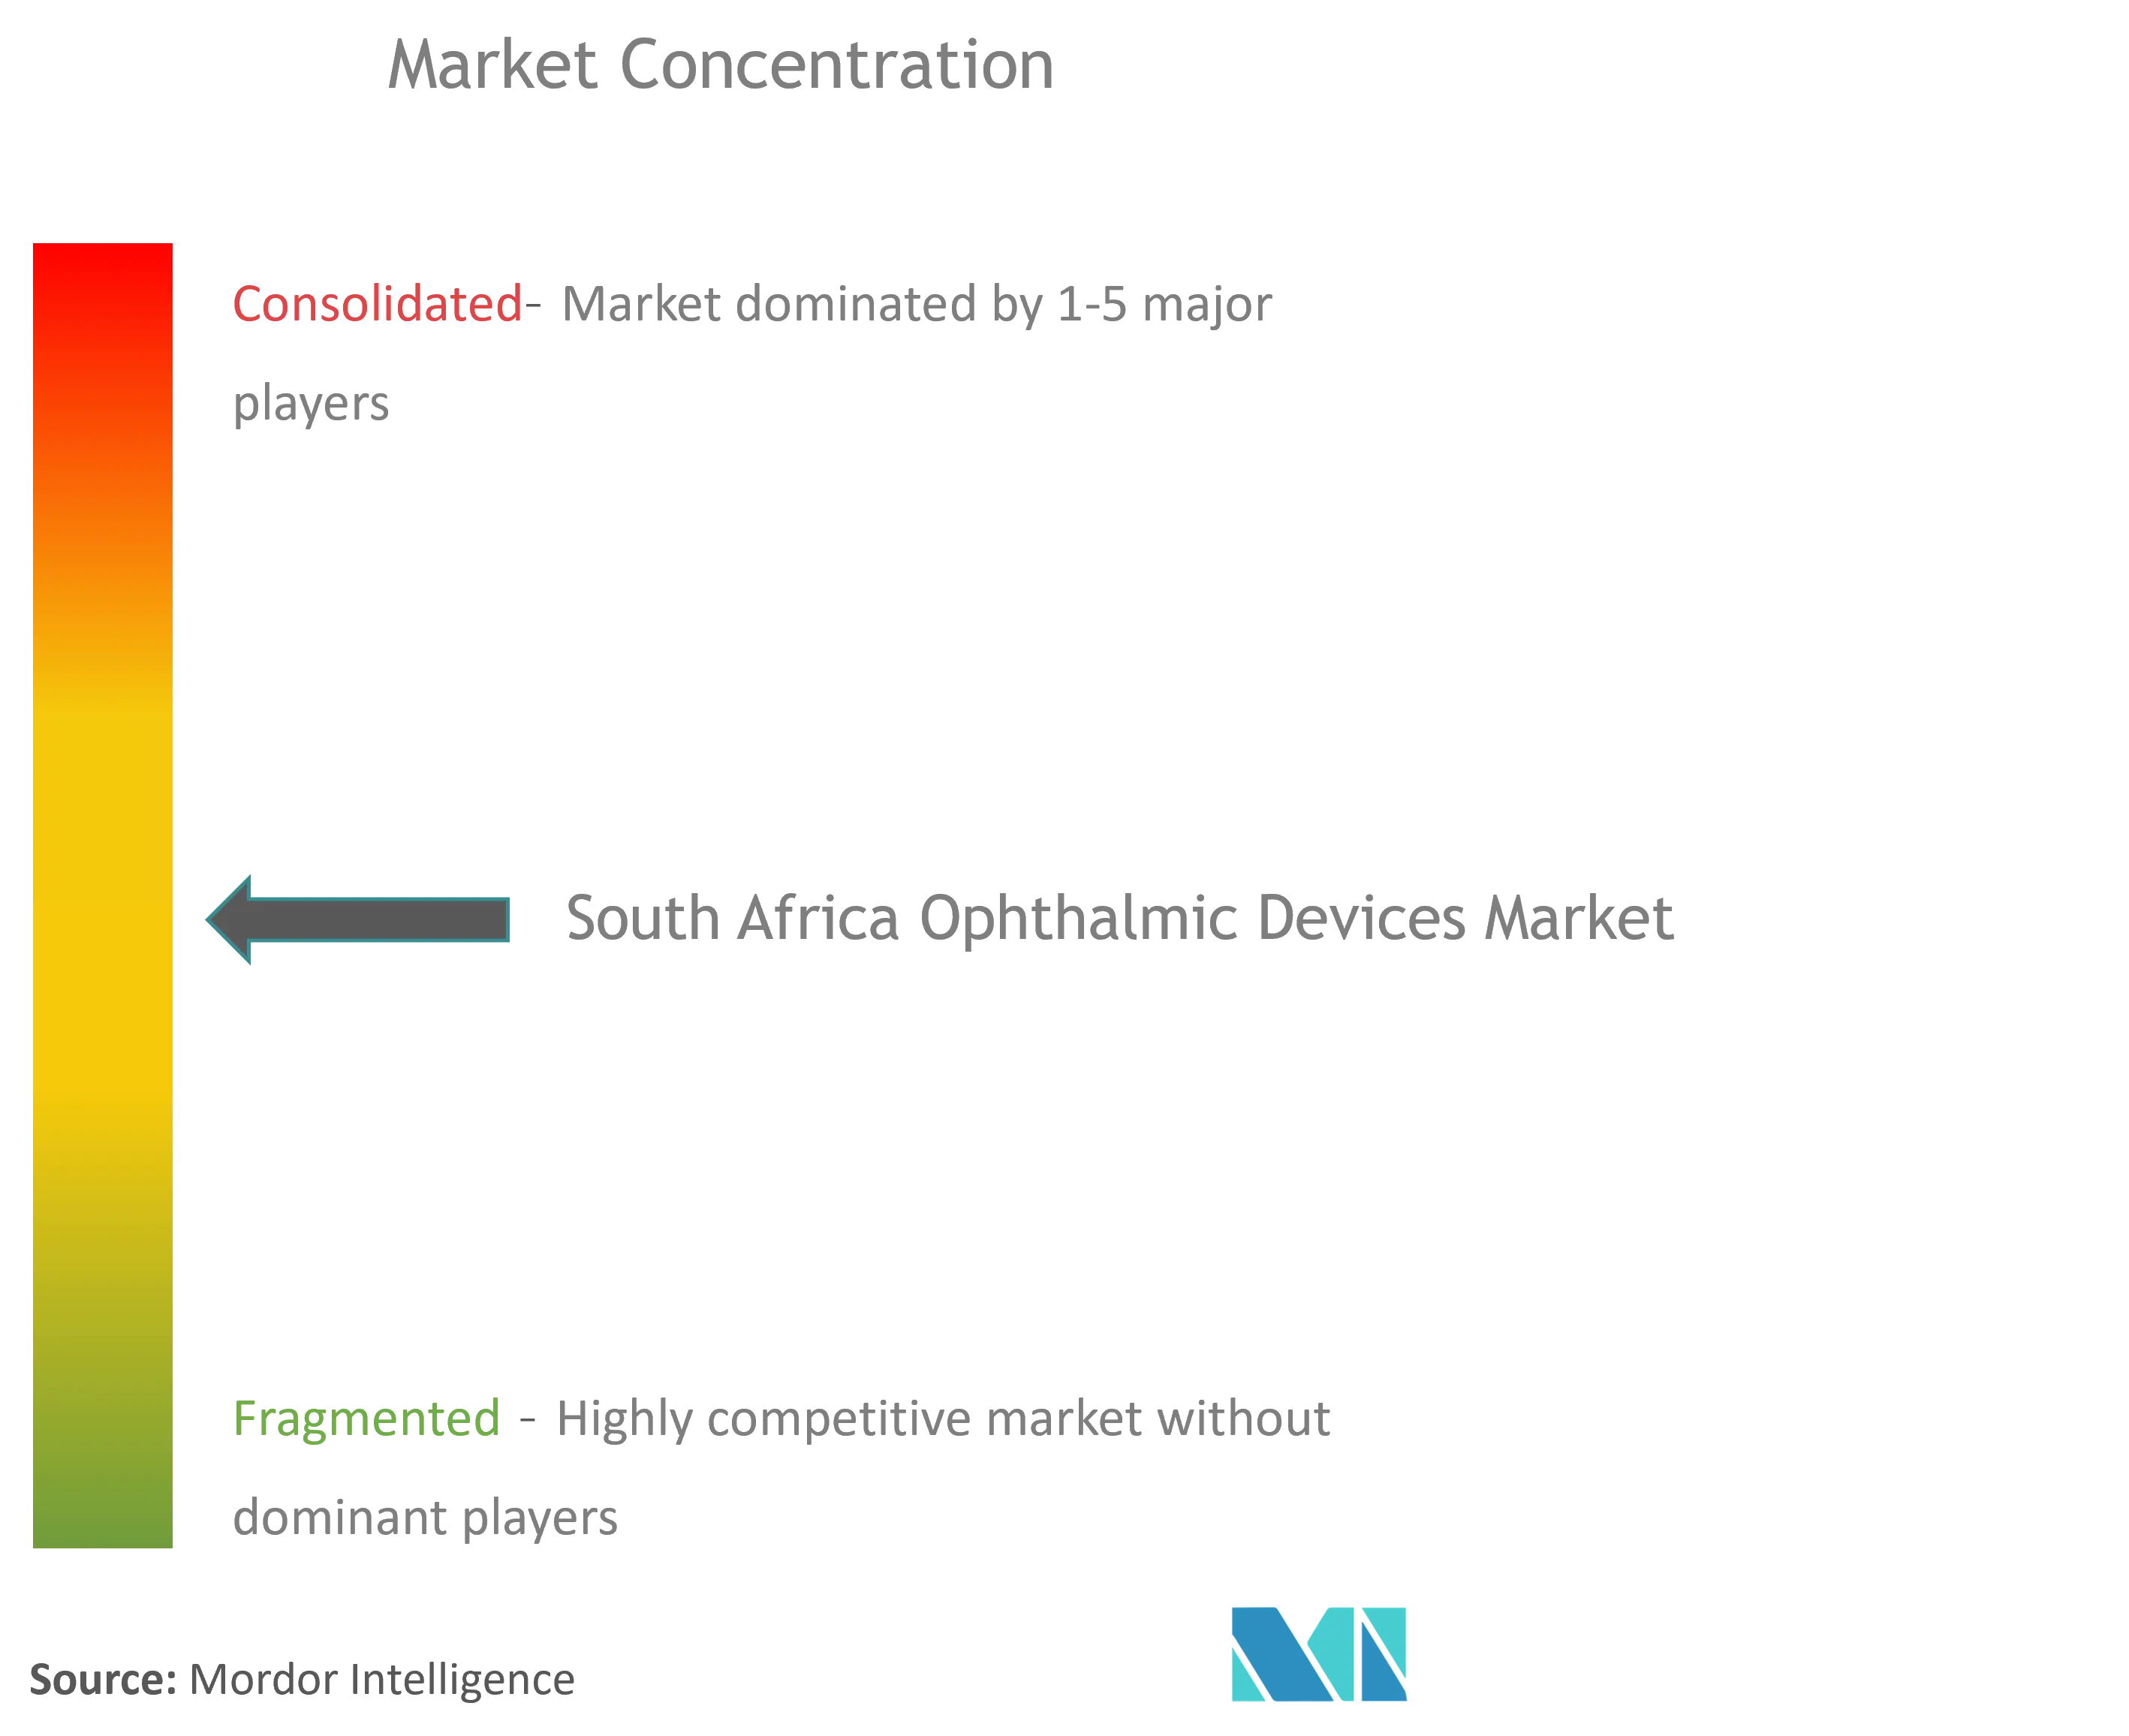 South Africa ophthalmic devices market - cl.png